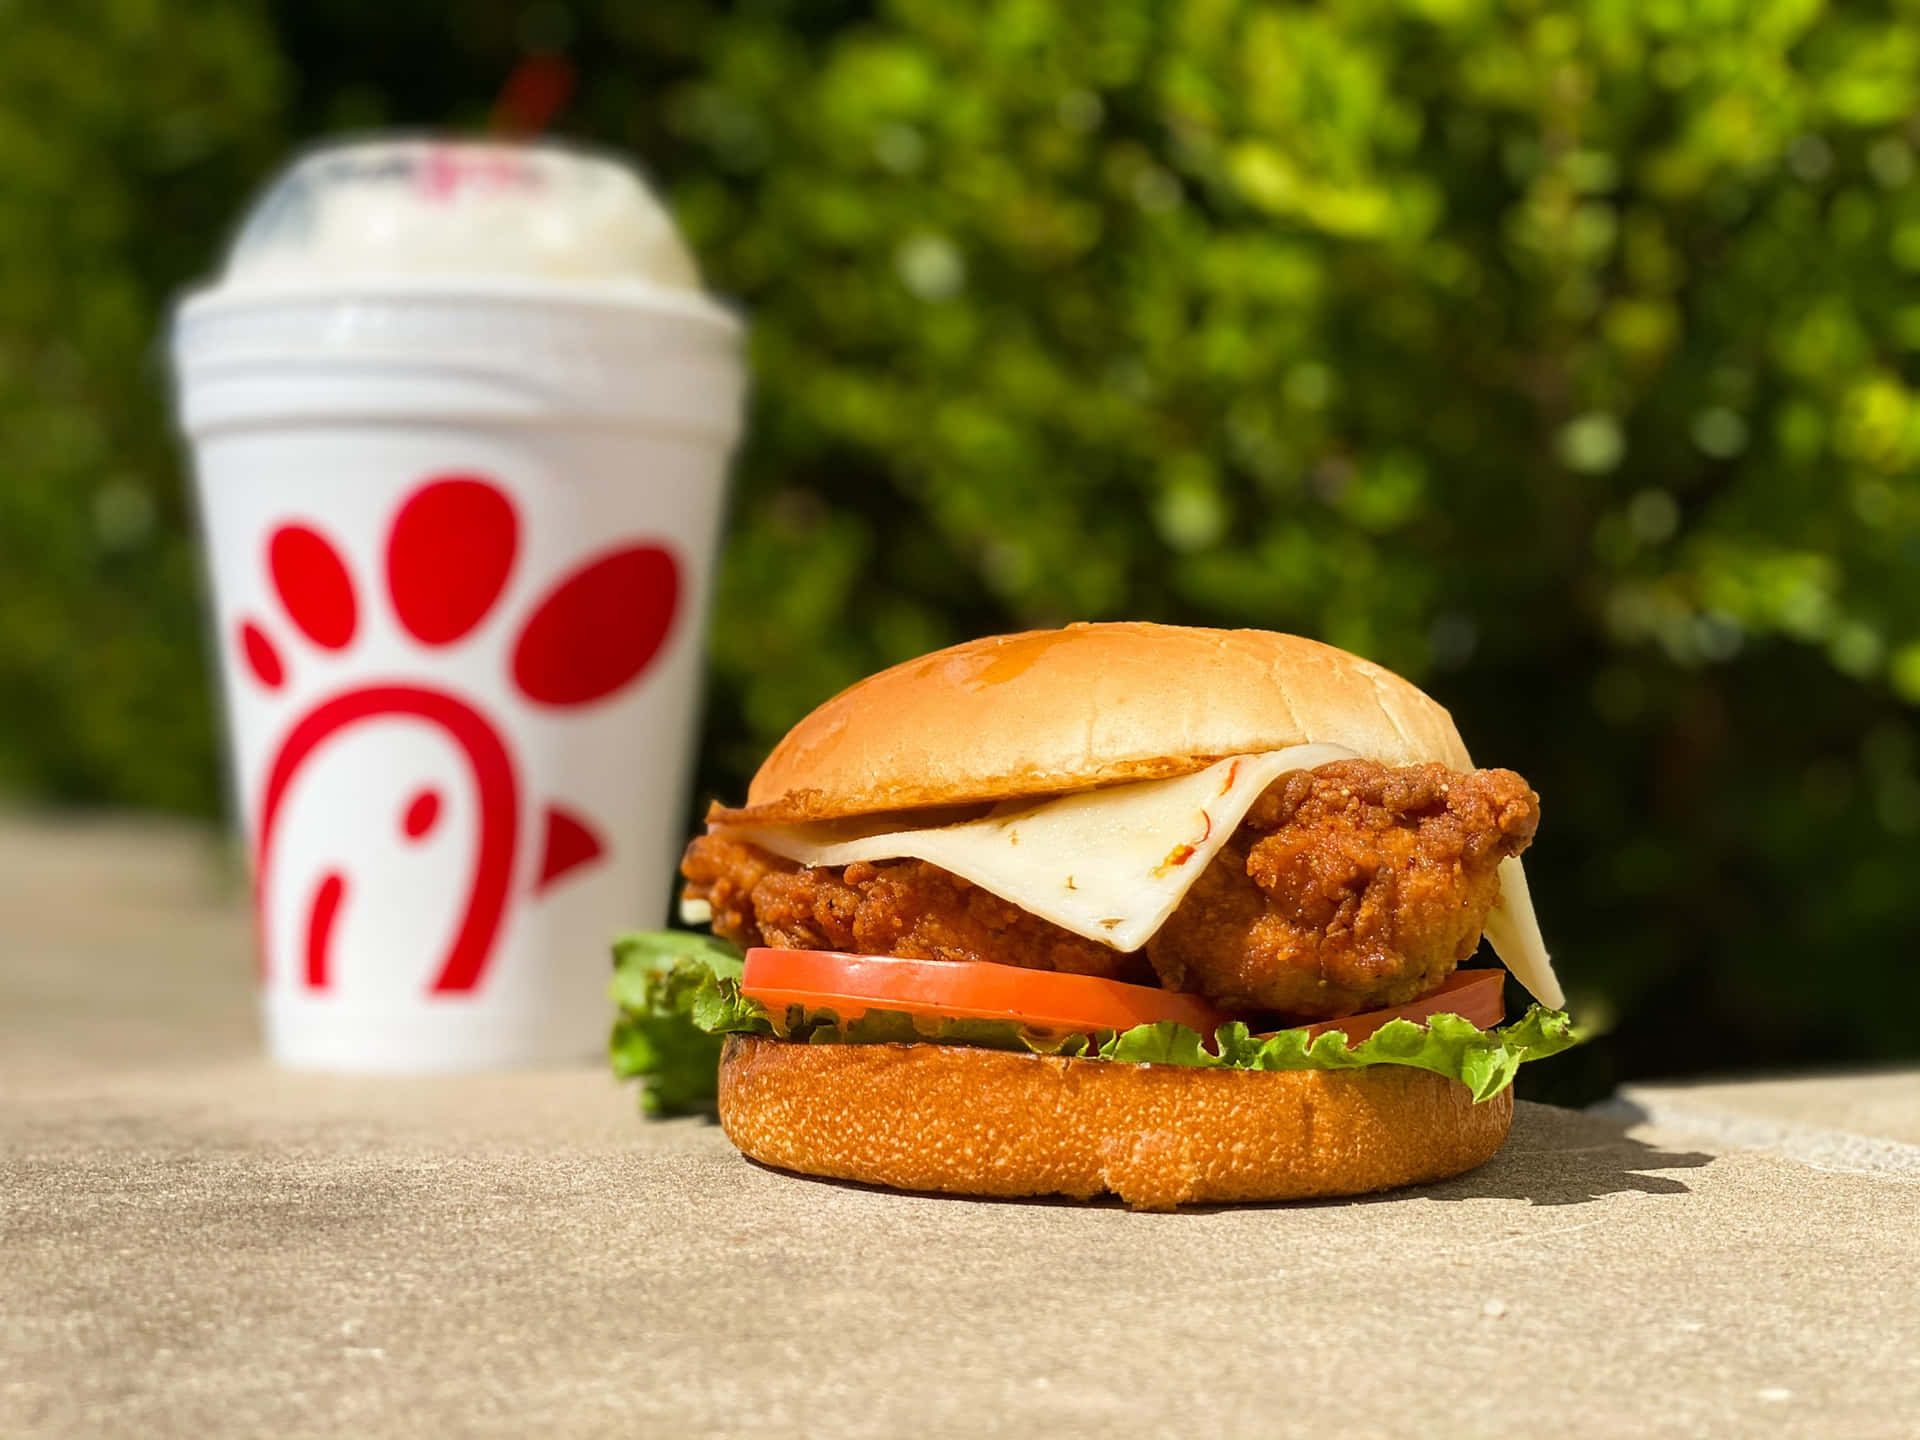 "Fresh and Delicious Chick Fil A Sandwiches"